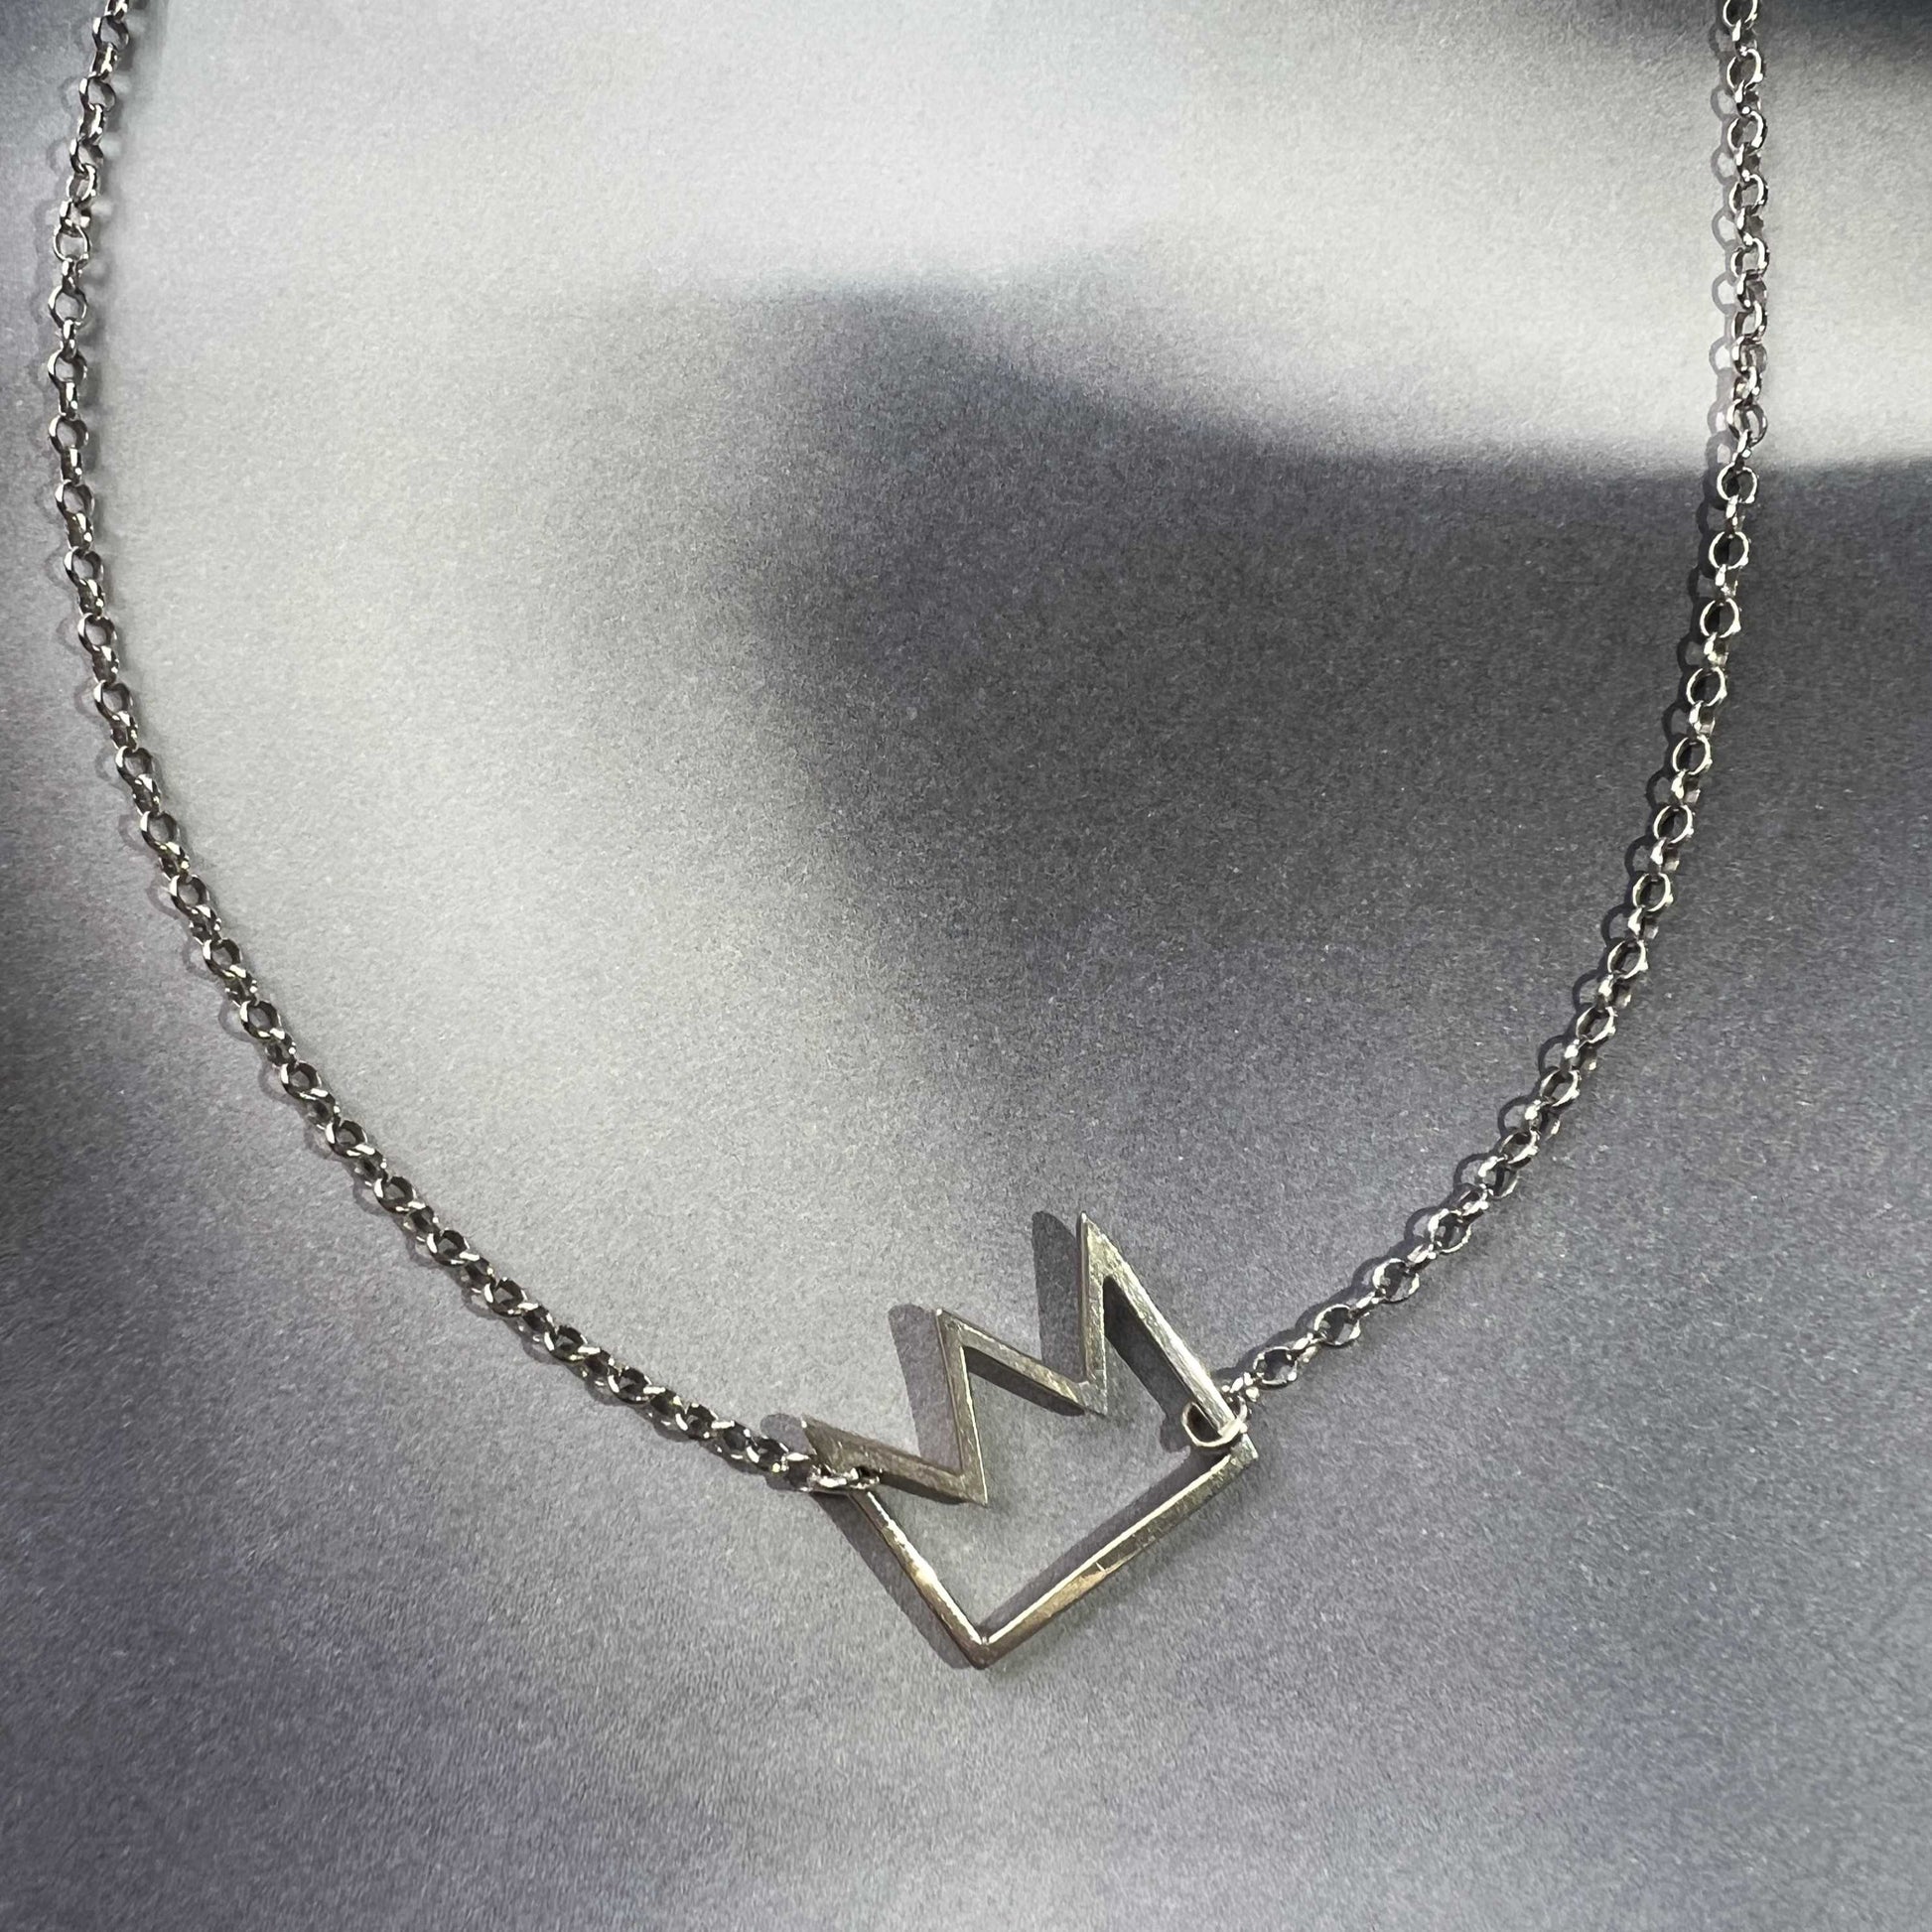 CHAIN WITH PENDANT "CROWN" / SILVER